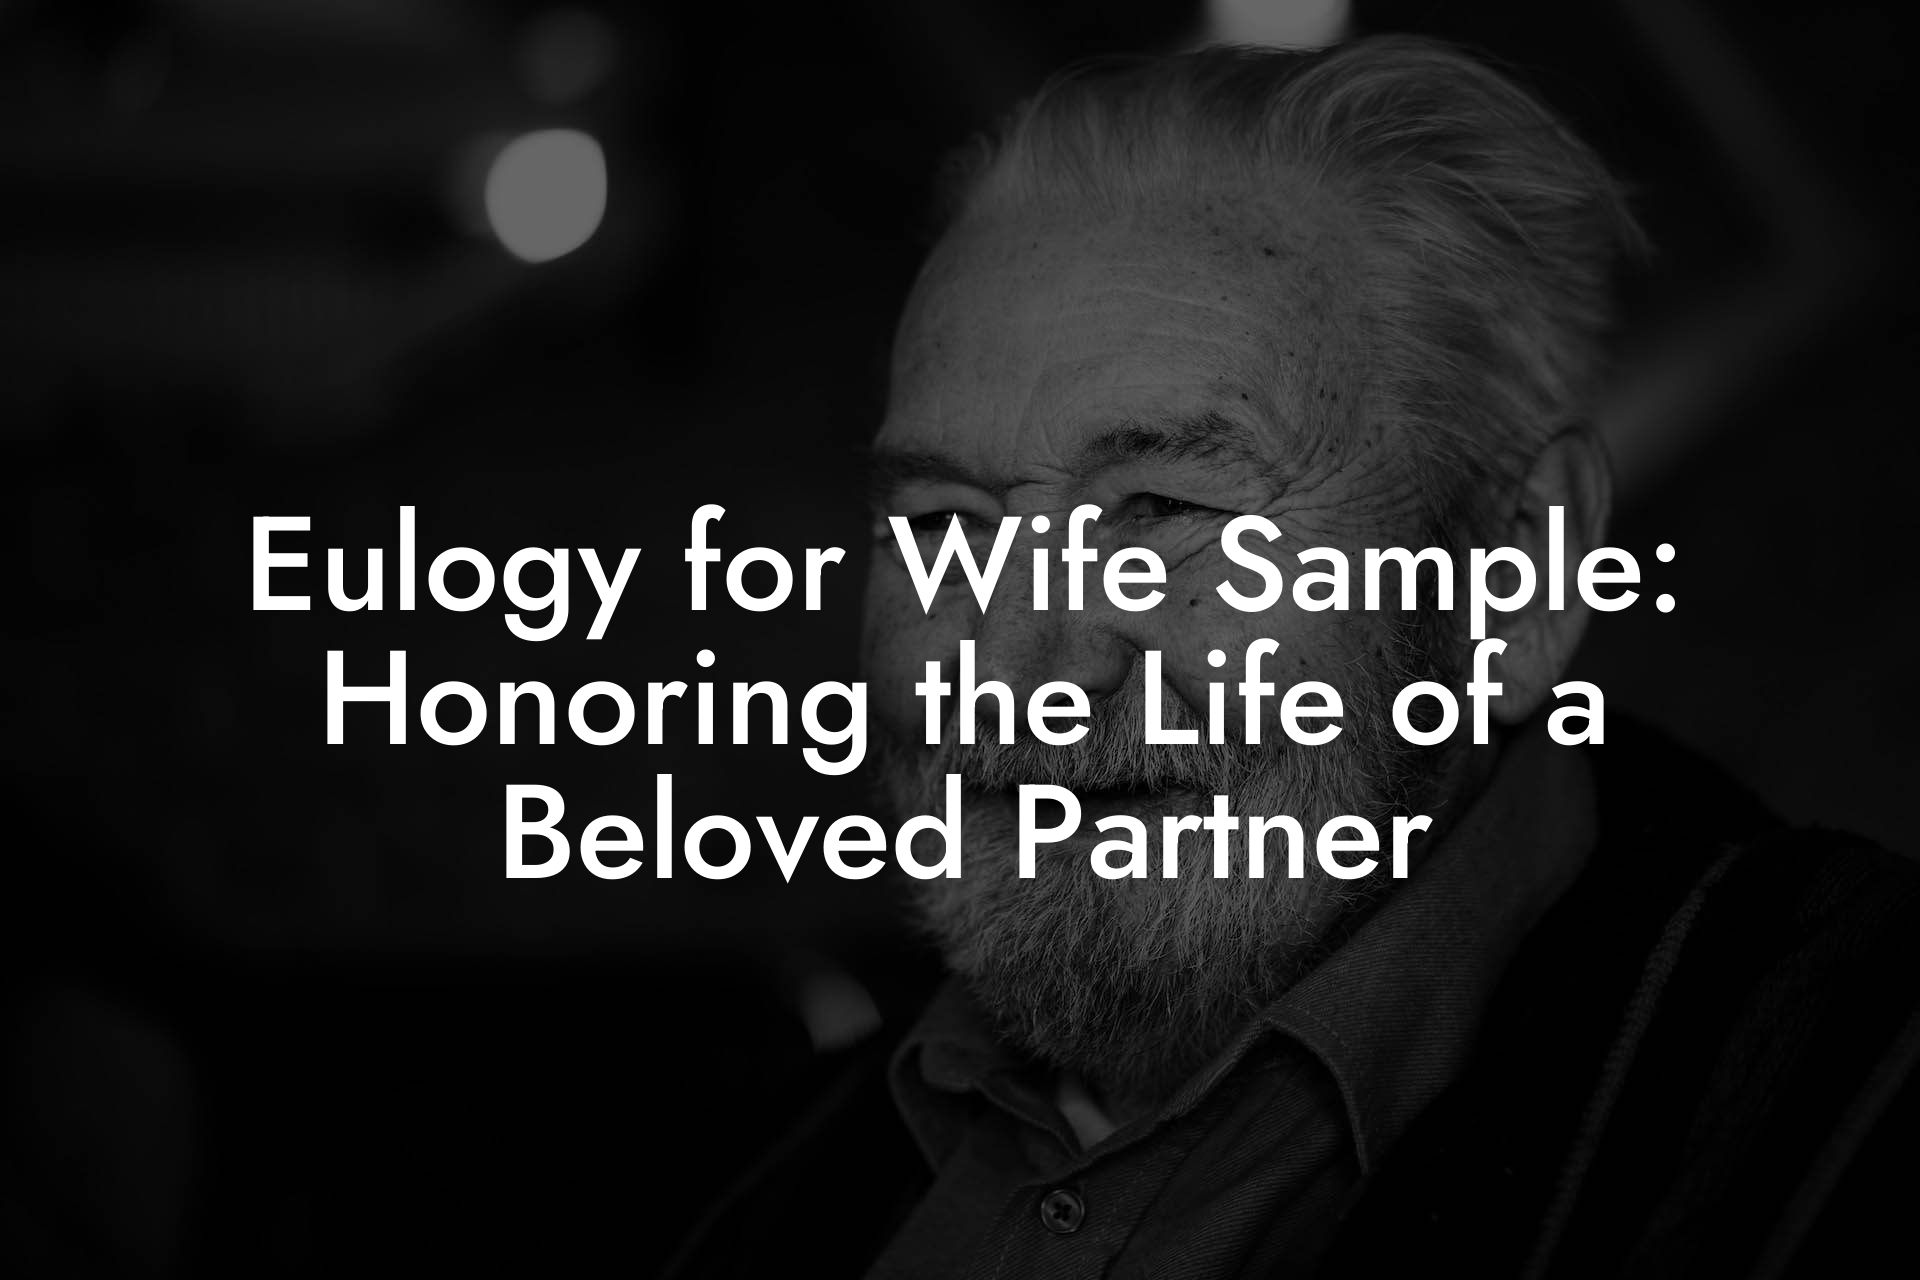 Eulogy for Wife Sample: Honoring the Life of a Beloved Partner